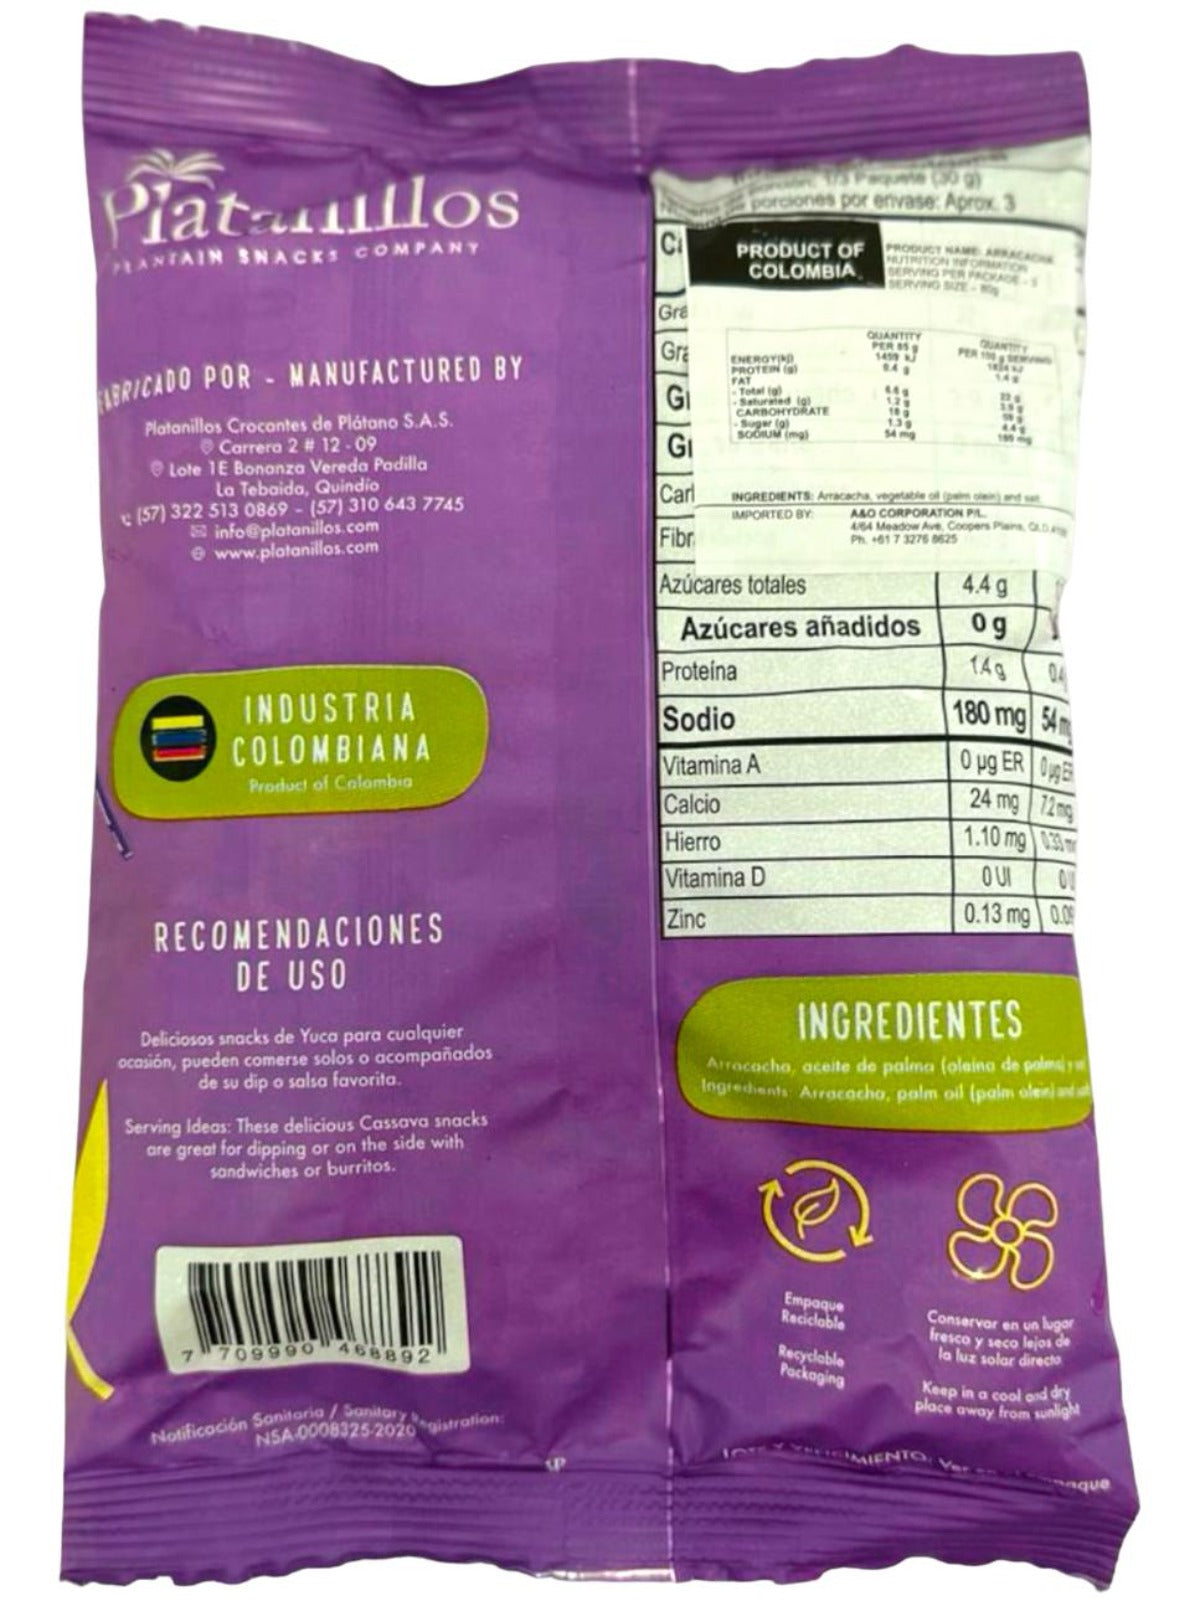 Patakis Aracachacha Premium Arracacha Colombian Chips Salted 80g  Best Before End Of March 2024